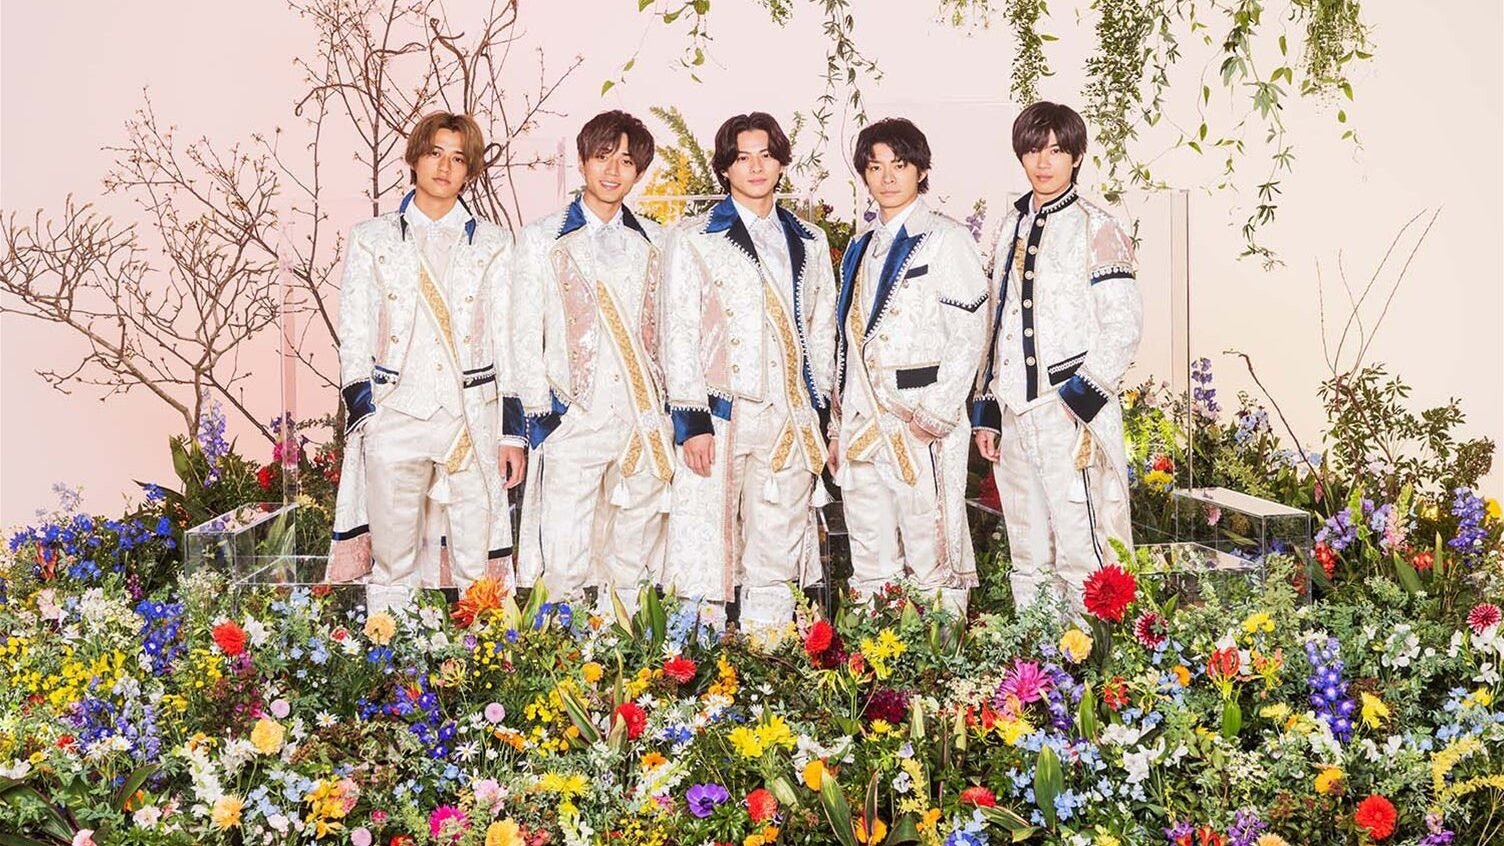 You are currently viewing King & Prince just sold 1.2m physical copies of their latest album ‘Mr.5’ in its first week in Japan, becoming the market’s fastest-selling album this year